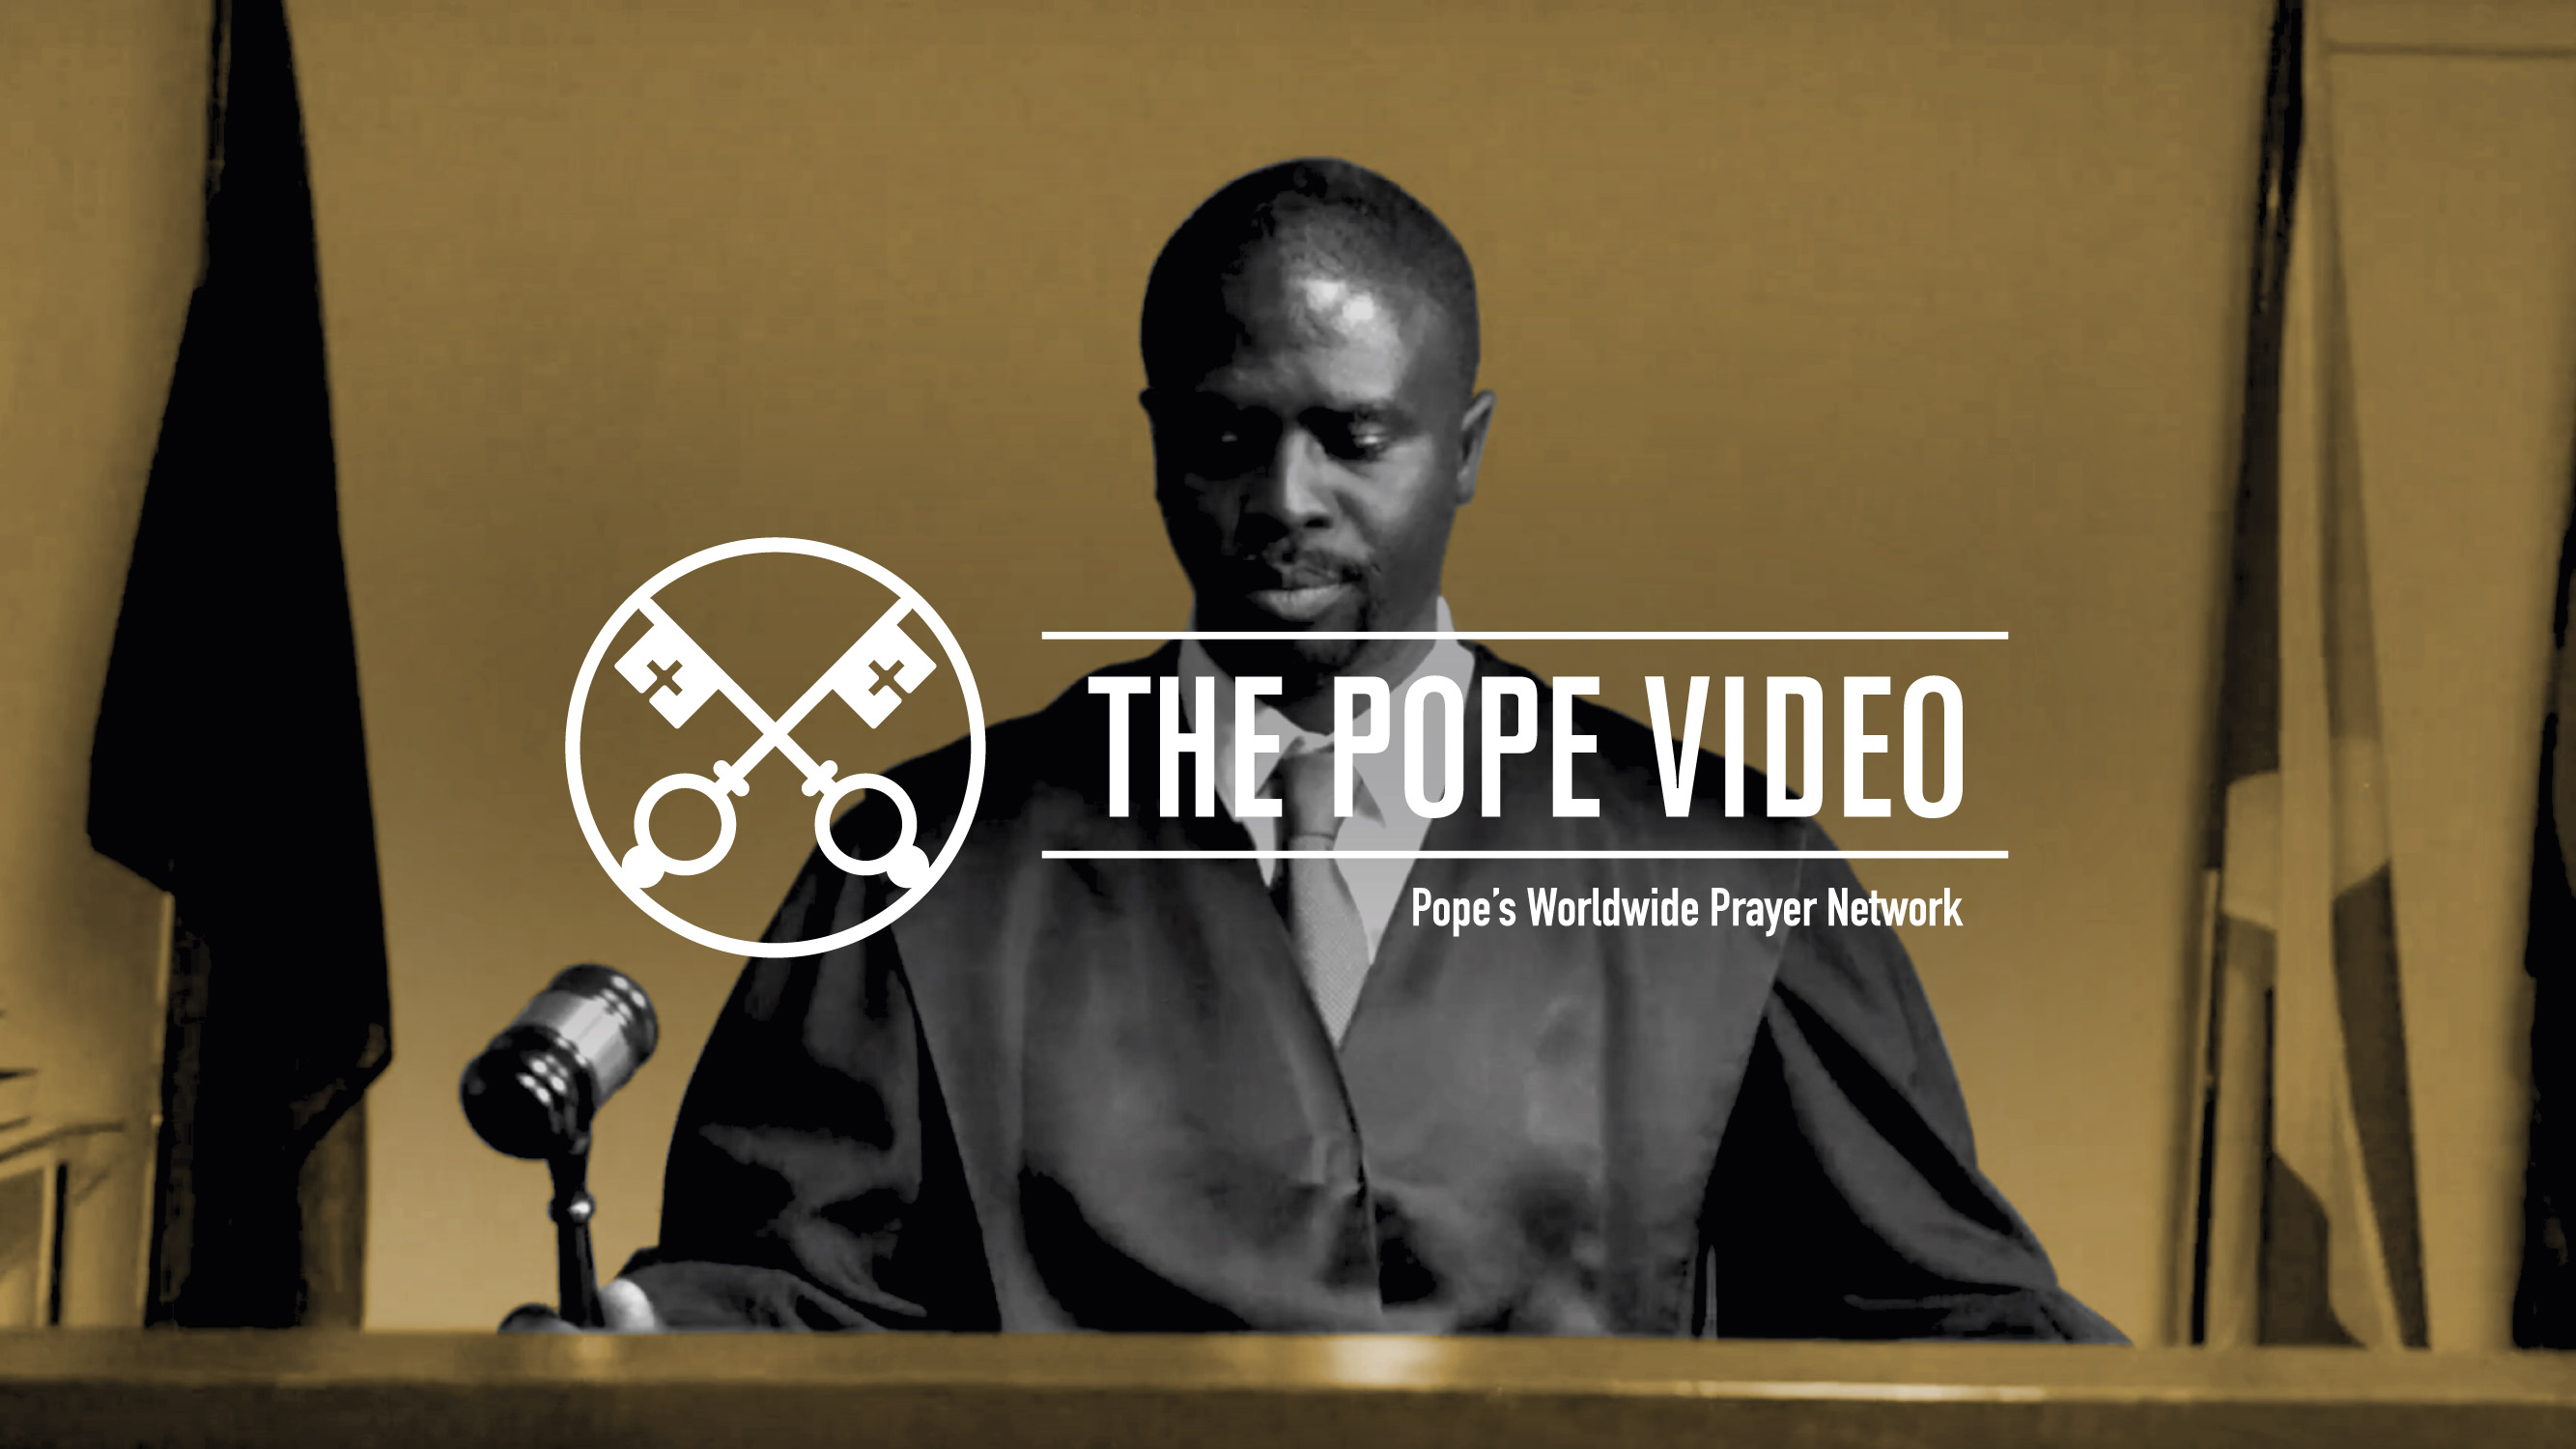 The Pope Video July 2019 (Official Image)